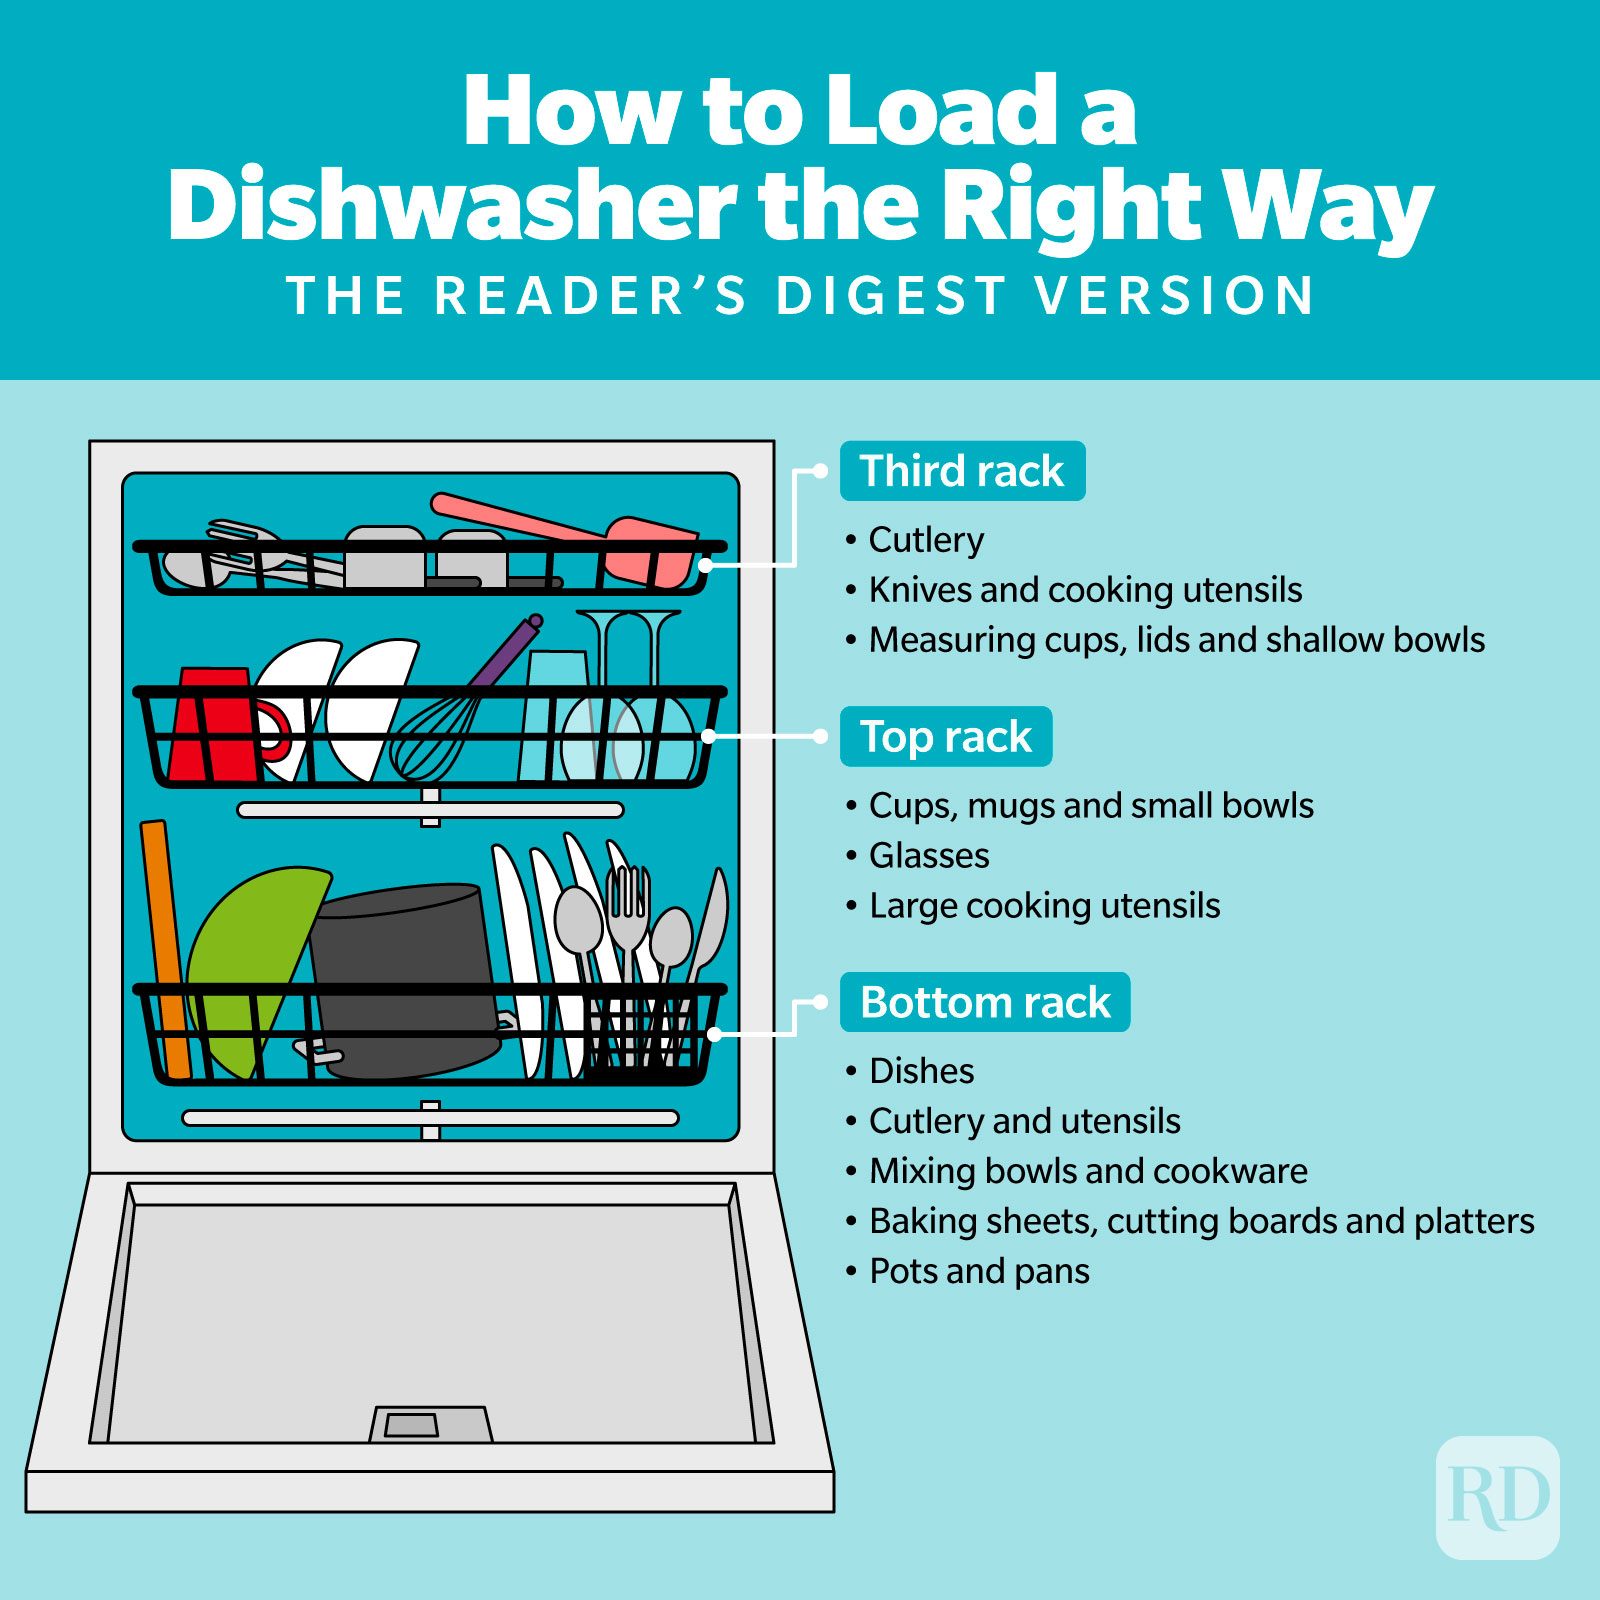 How To Load A Dishwasher The Right Way Infographic Gettyimages 512535624 V2